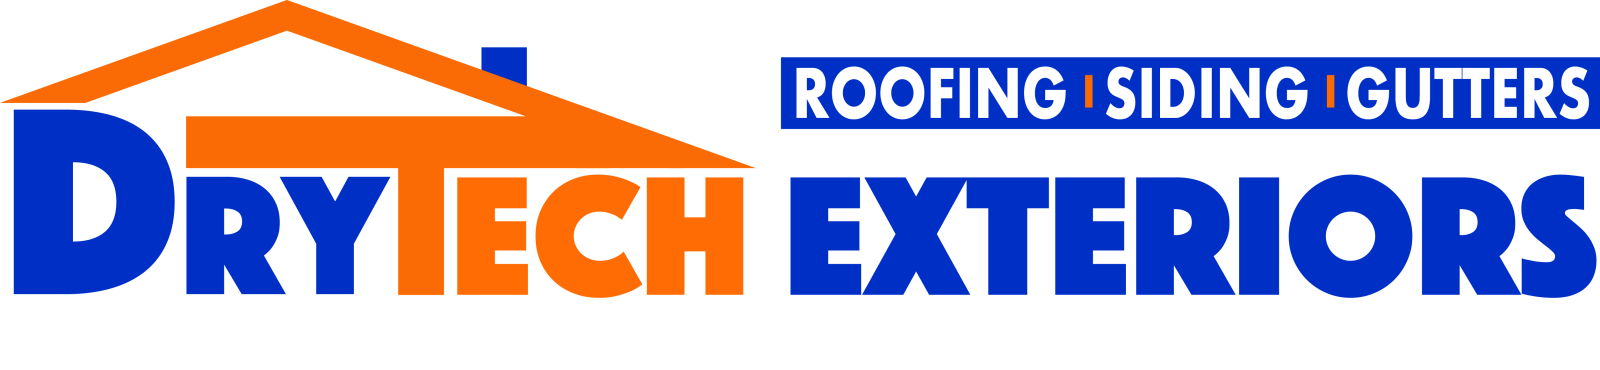 Roofing by DryTech Exteriors Icon